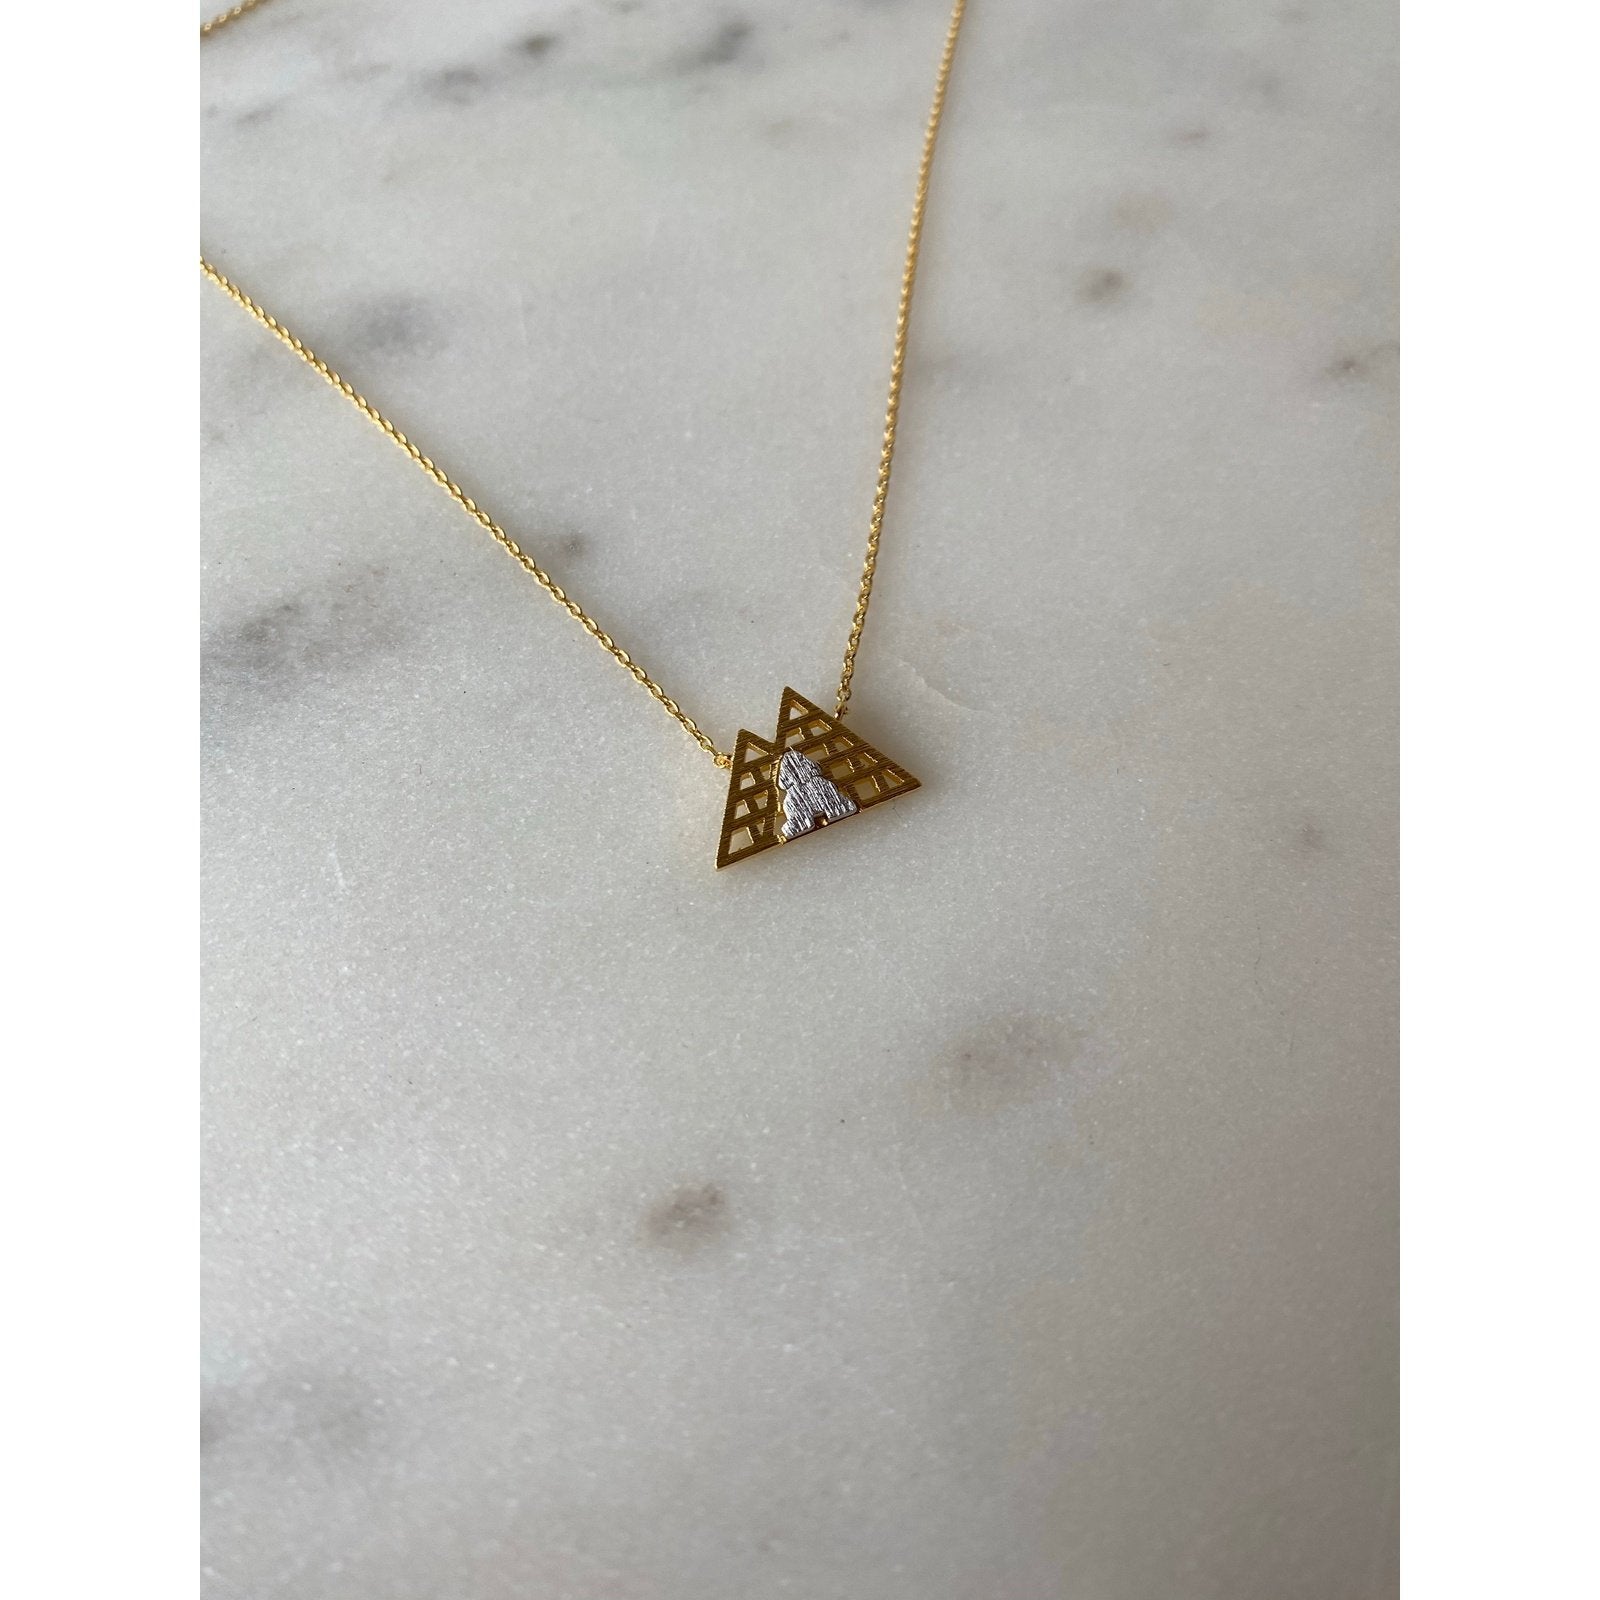 Great Pyramids Necklace